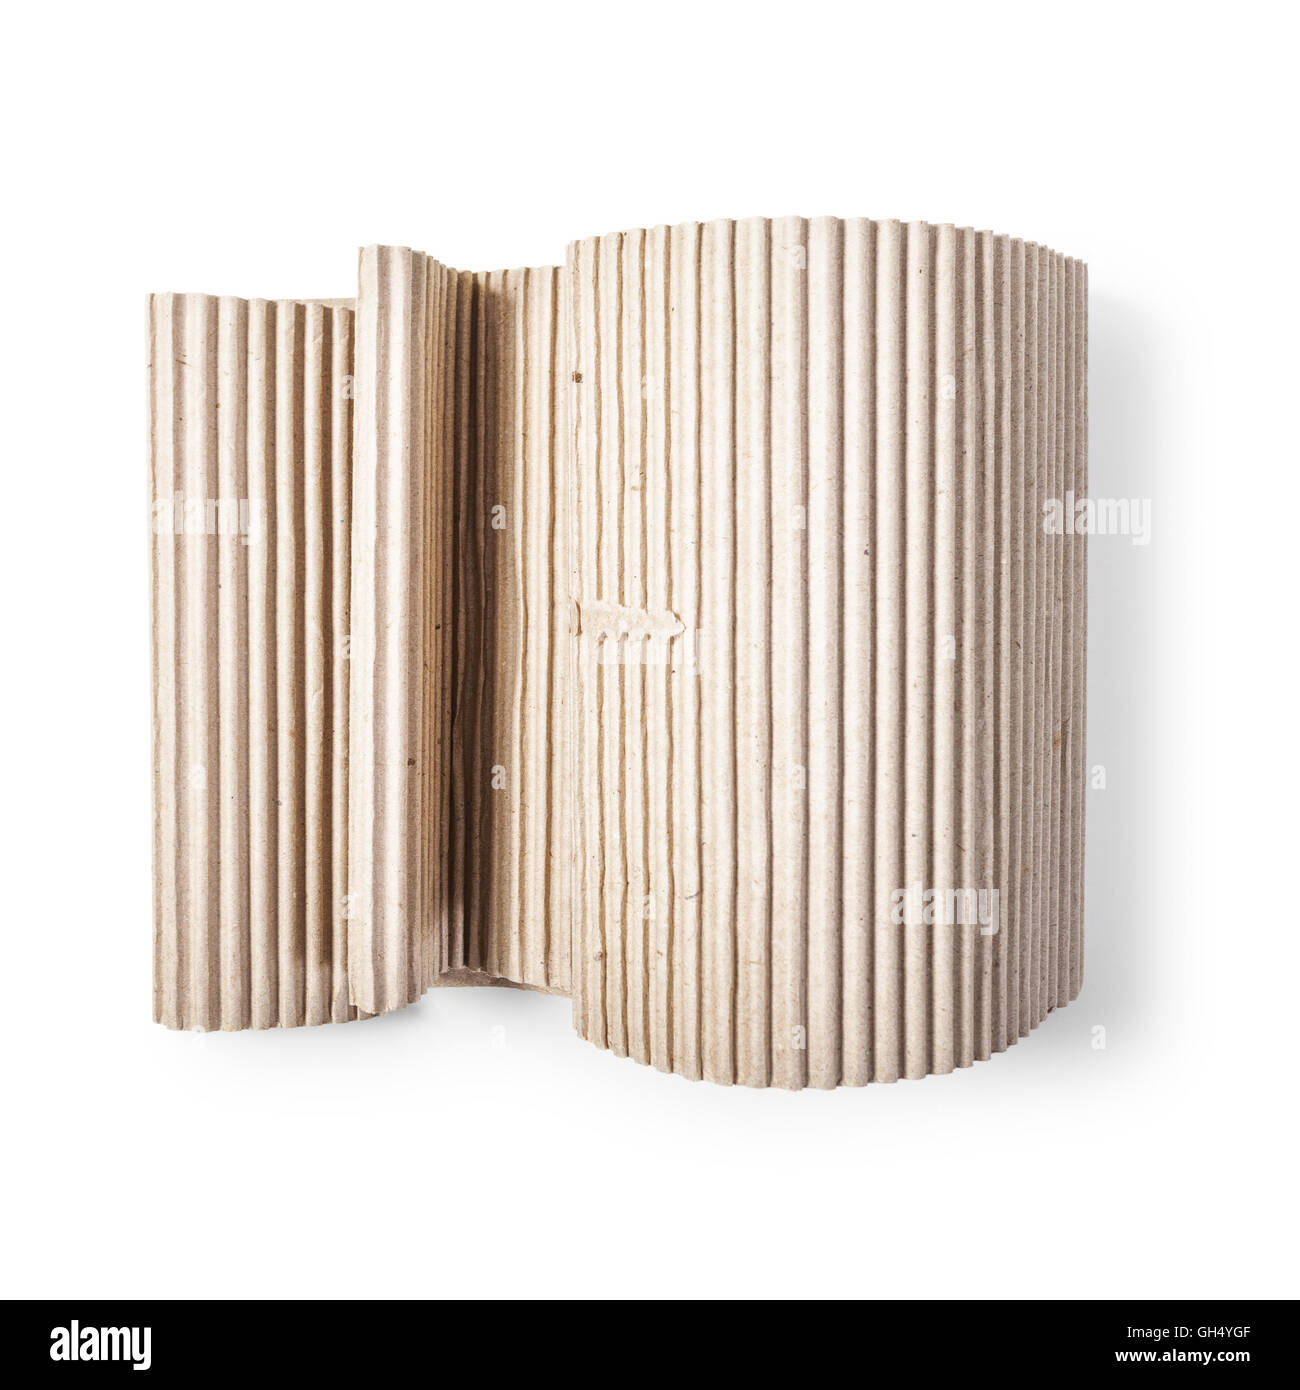 Corrugated cardboard role. Packaging material. Object isolated on white background with clipping path. Top view, flat lay Stock Photo